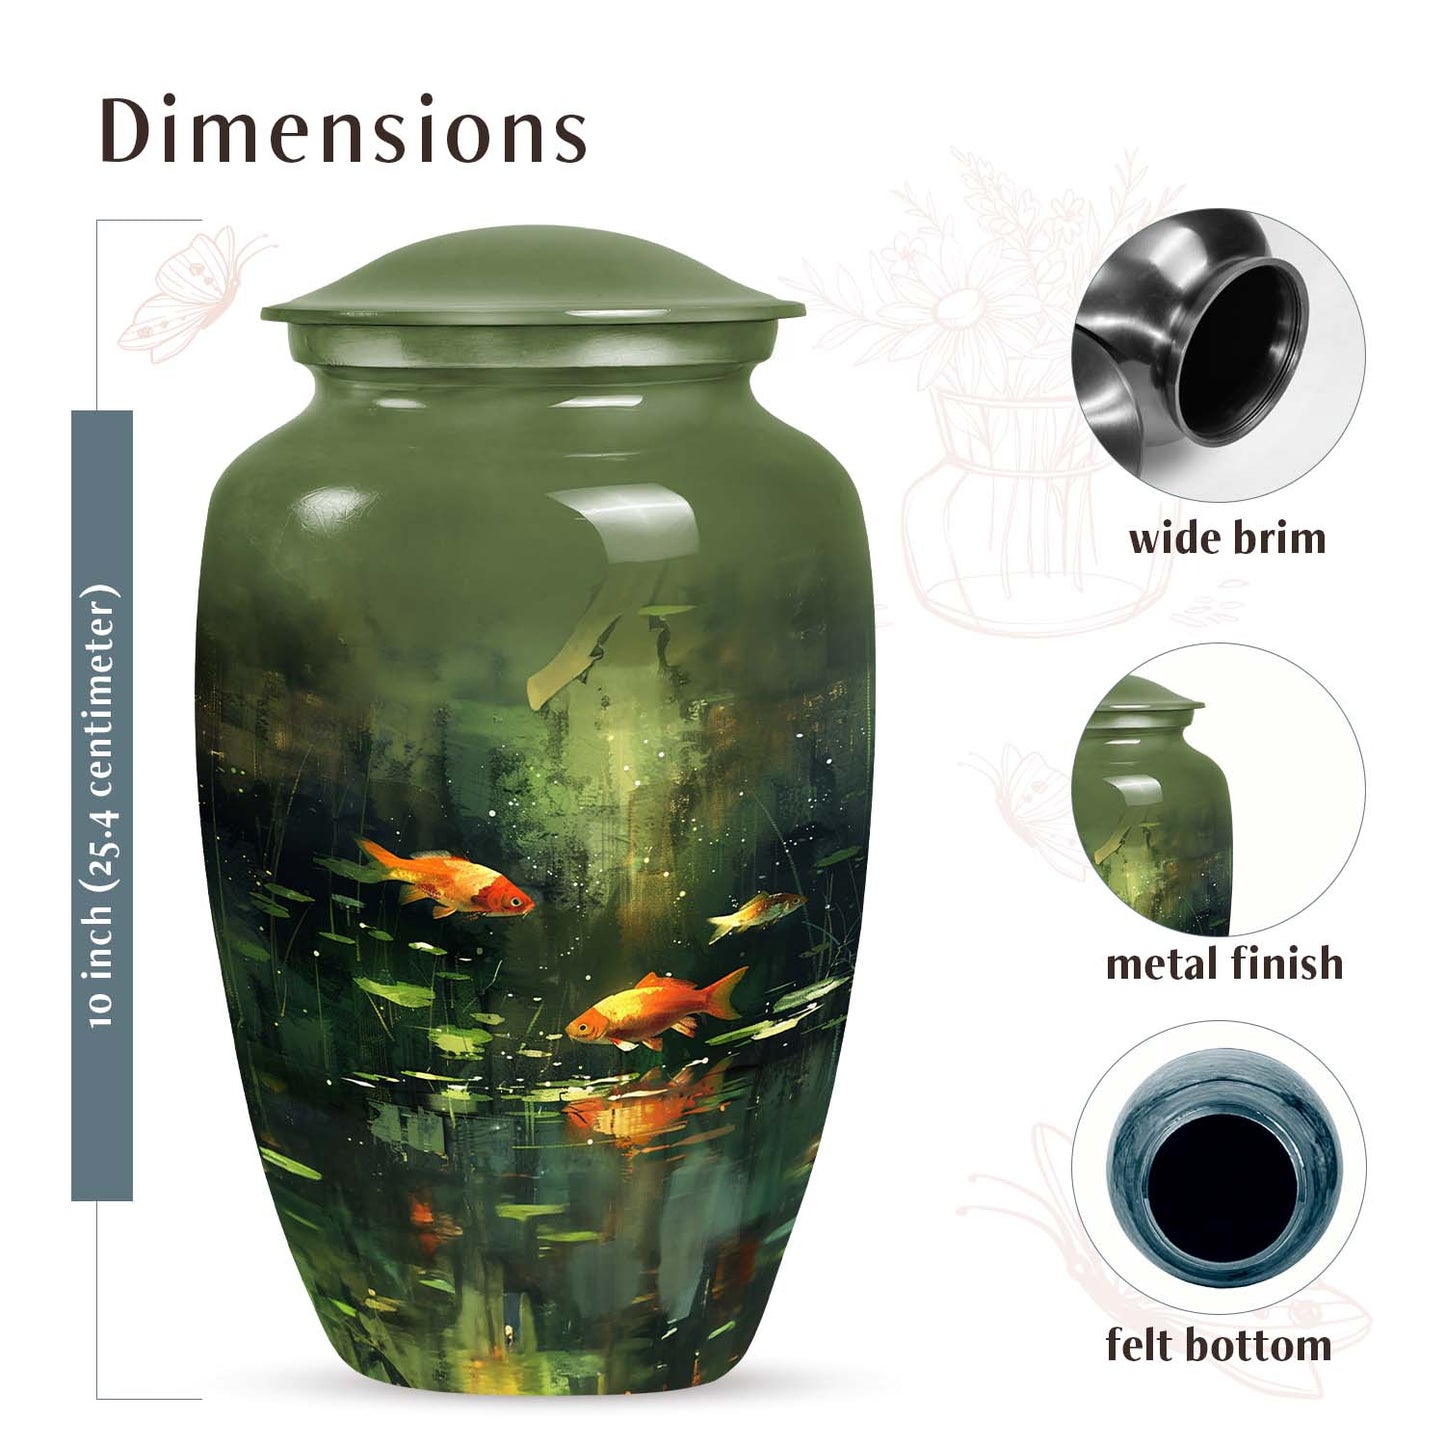 Classic Large Fish Urn, Unique design useful for funeral ashes storage and burial